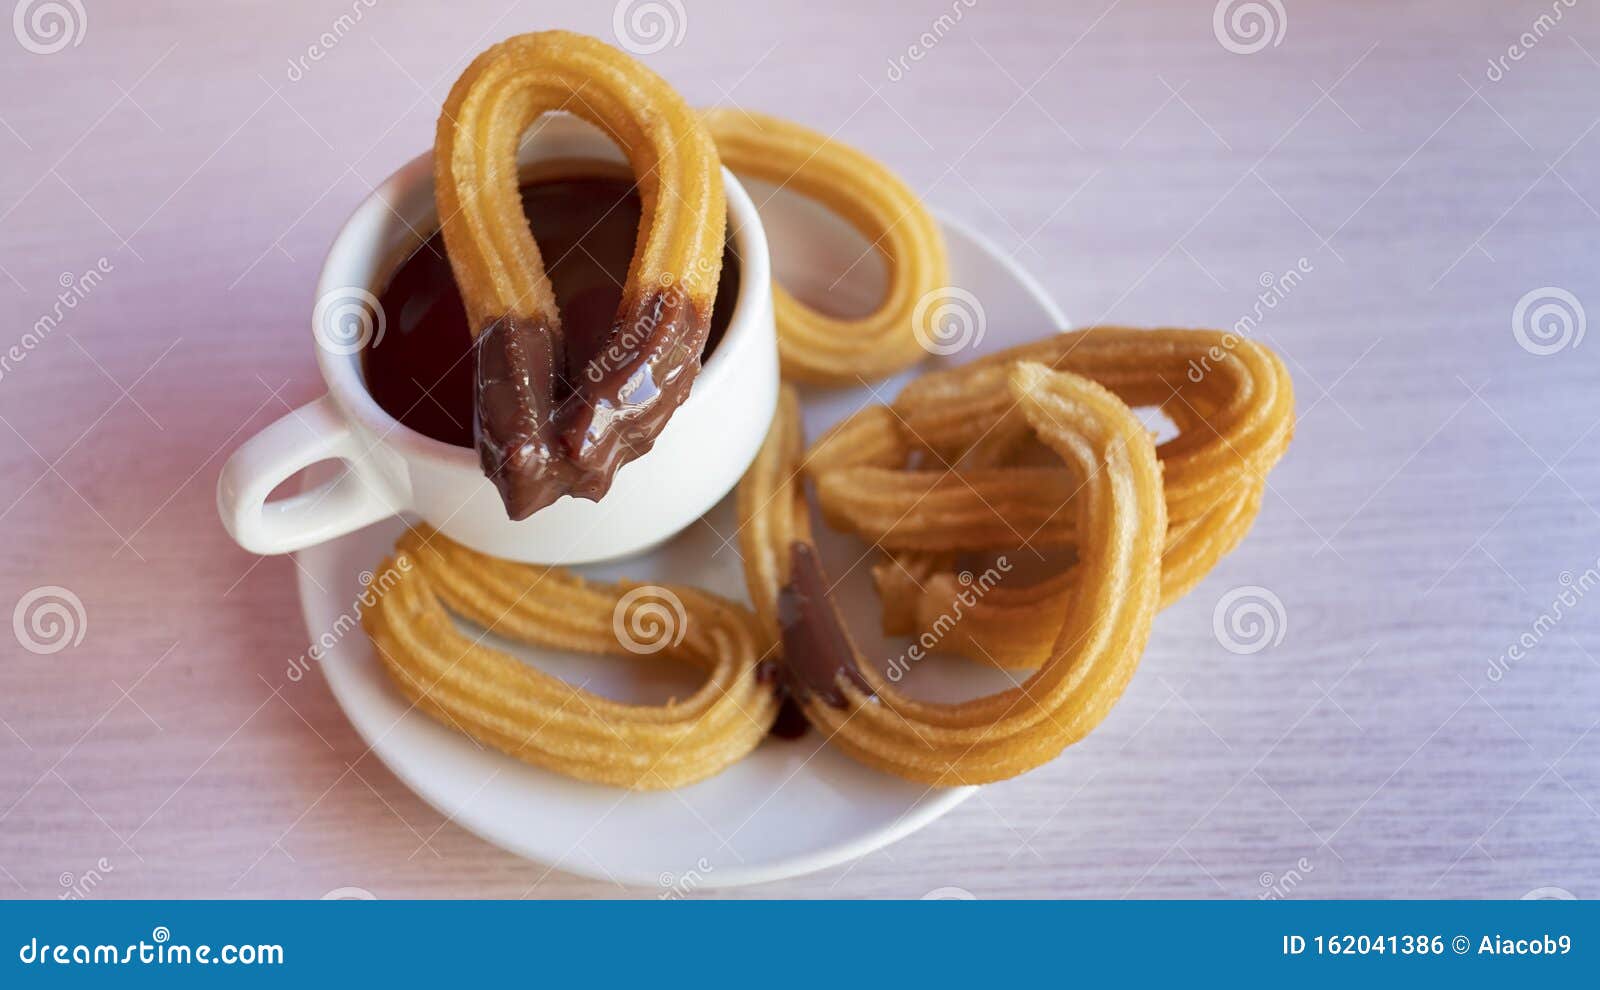 churros con chocolate caliente, a traditional spanish street food